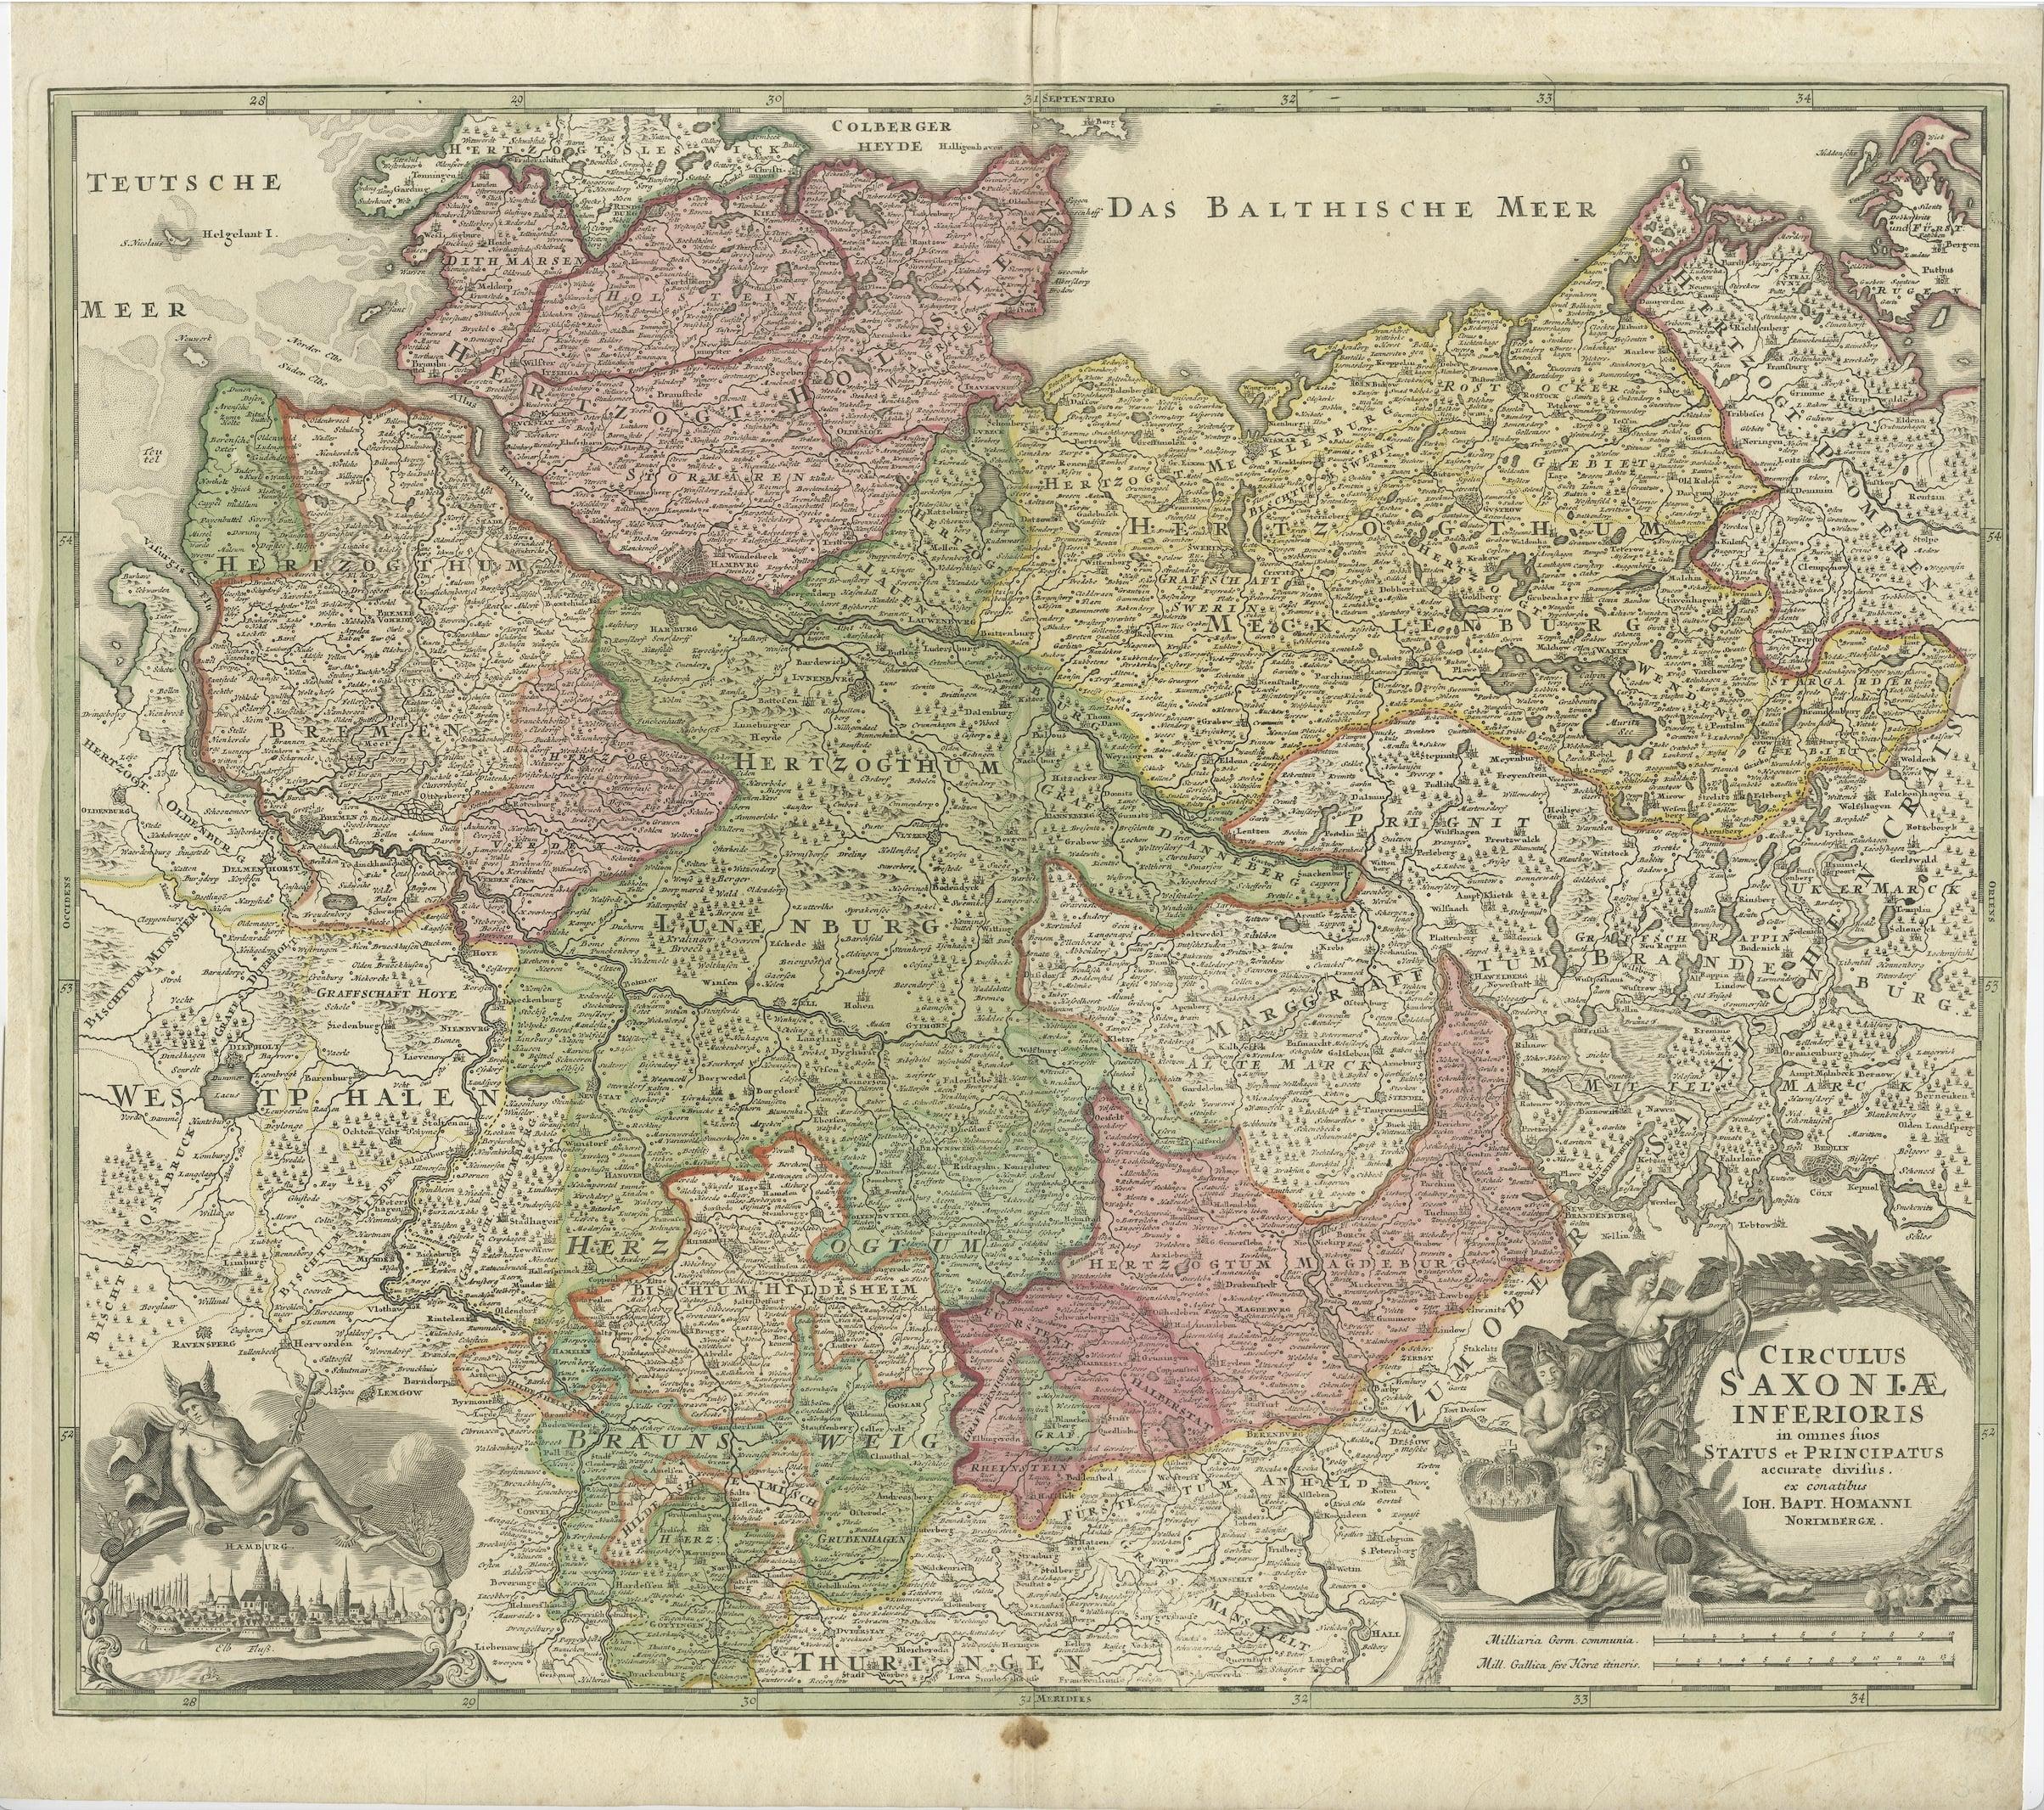 Duitsland, Sassonia; Johannes Baptist Homann - Circulus Saxoniae Inferioris in omnes suos Status et Principatus accurate divisus ex conatibus - 

A large map of Lower Saxony, extending from Hamburg with the Elbe River to the Baltic Sea with the